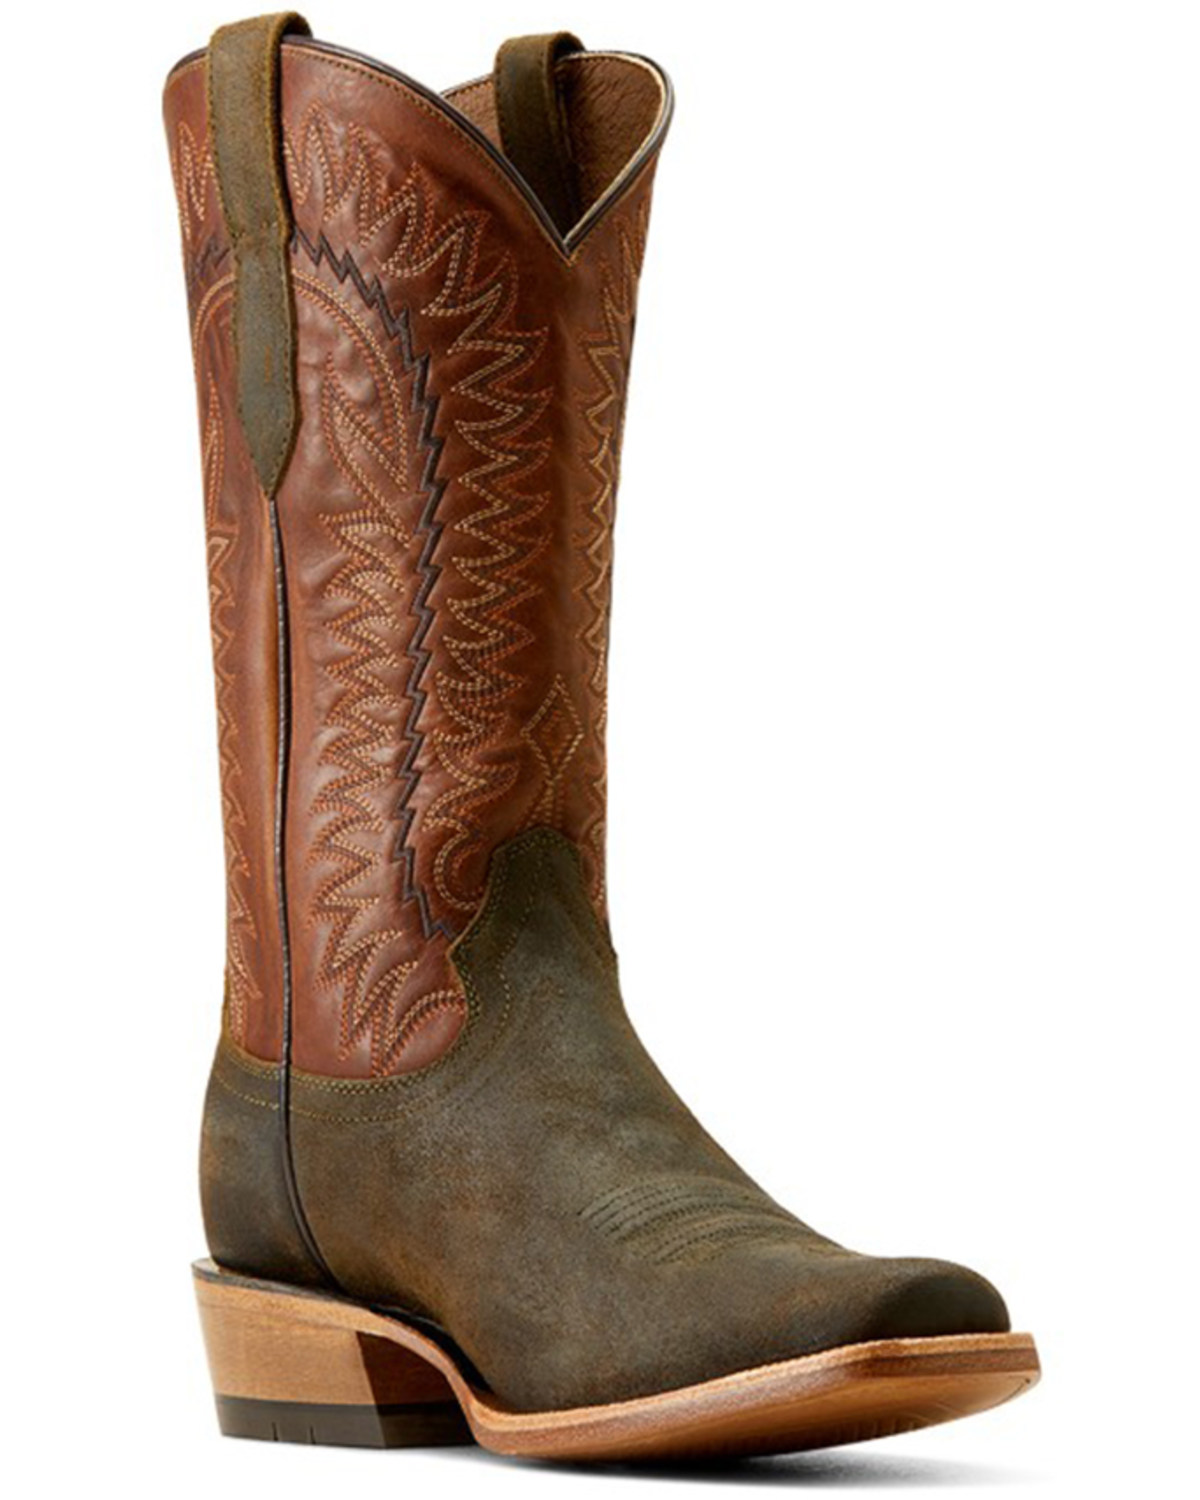 Ariat Men's Futurity Time Roughout Western Boots